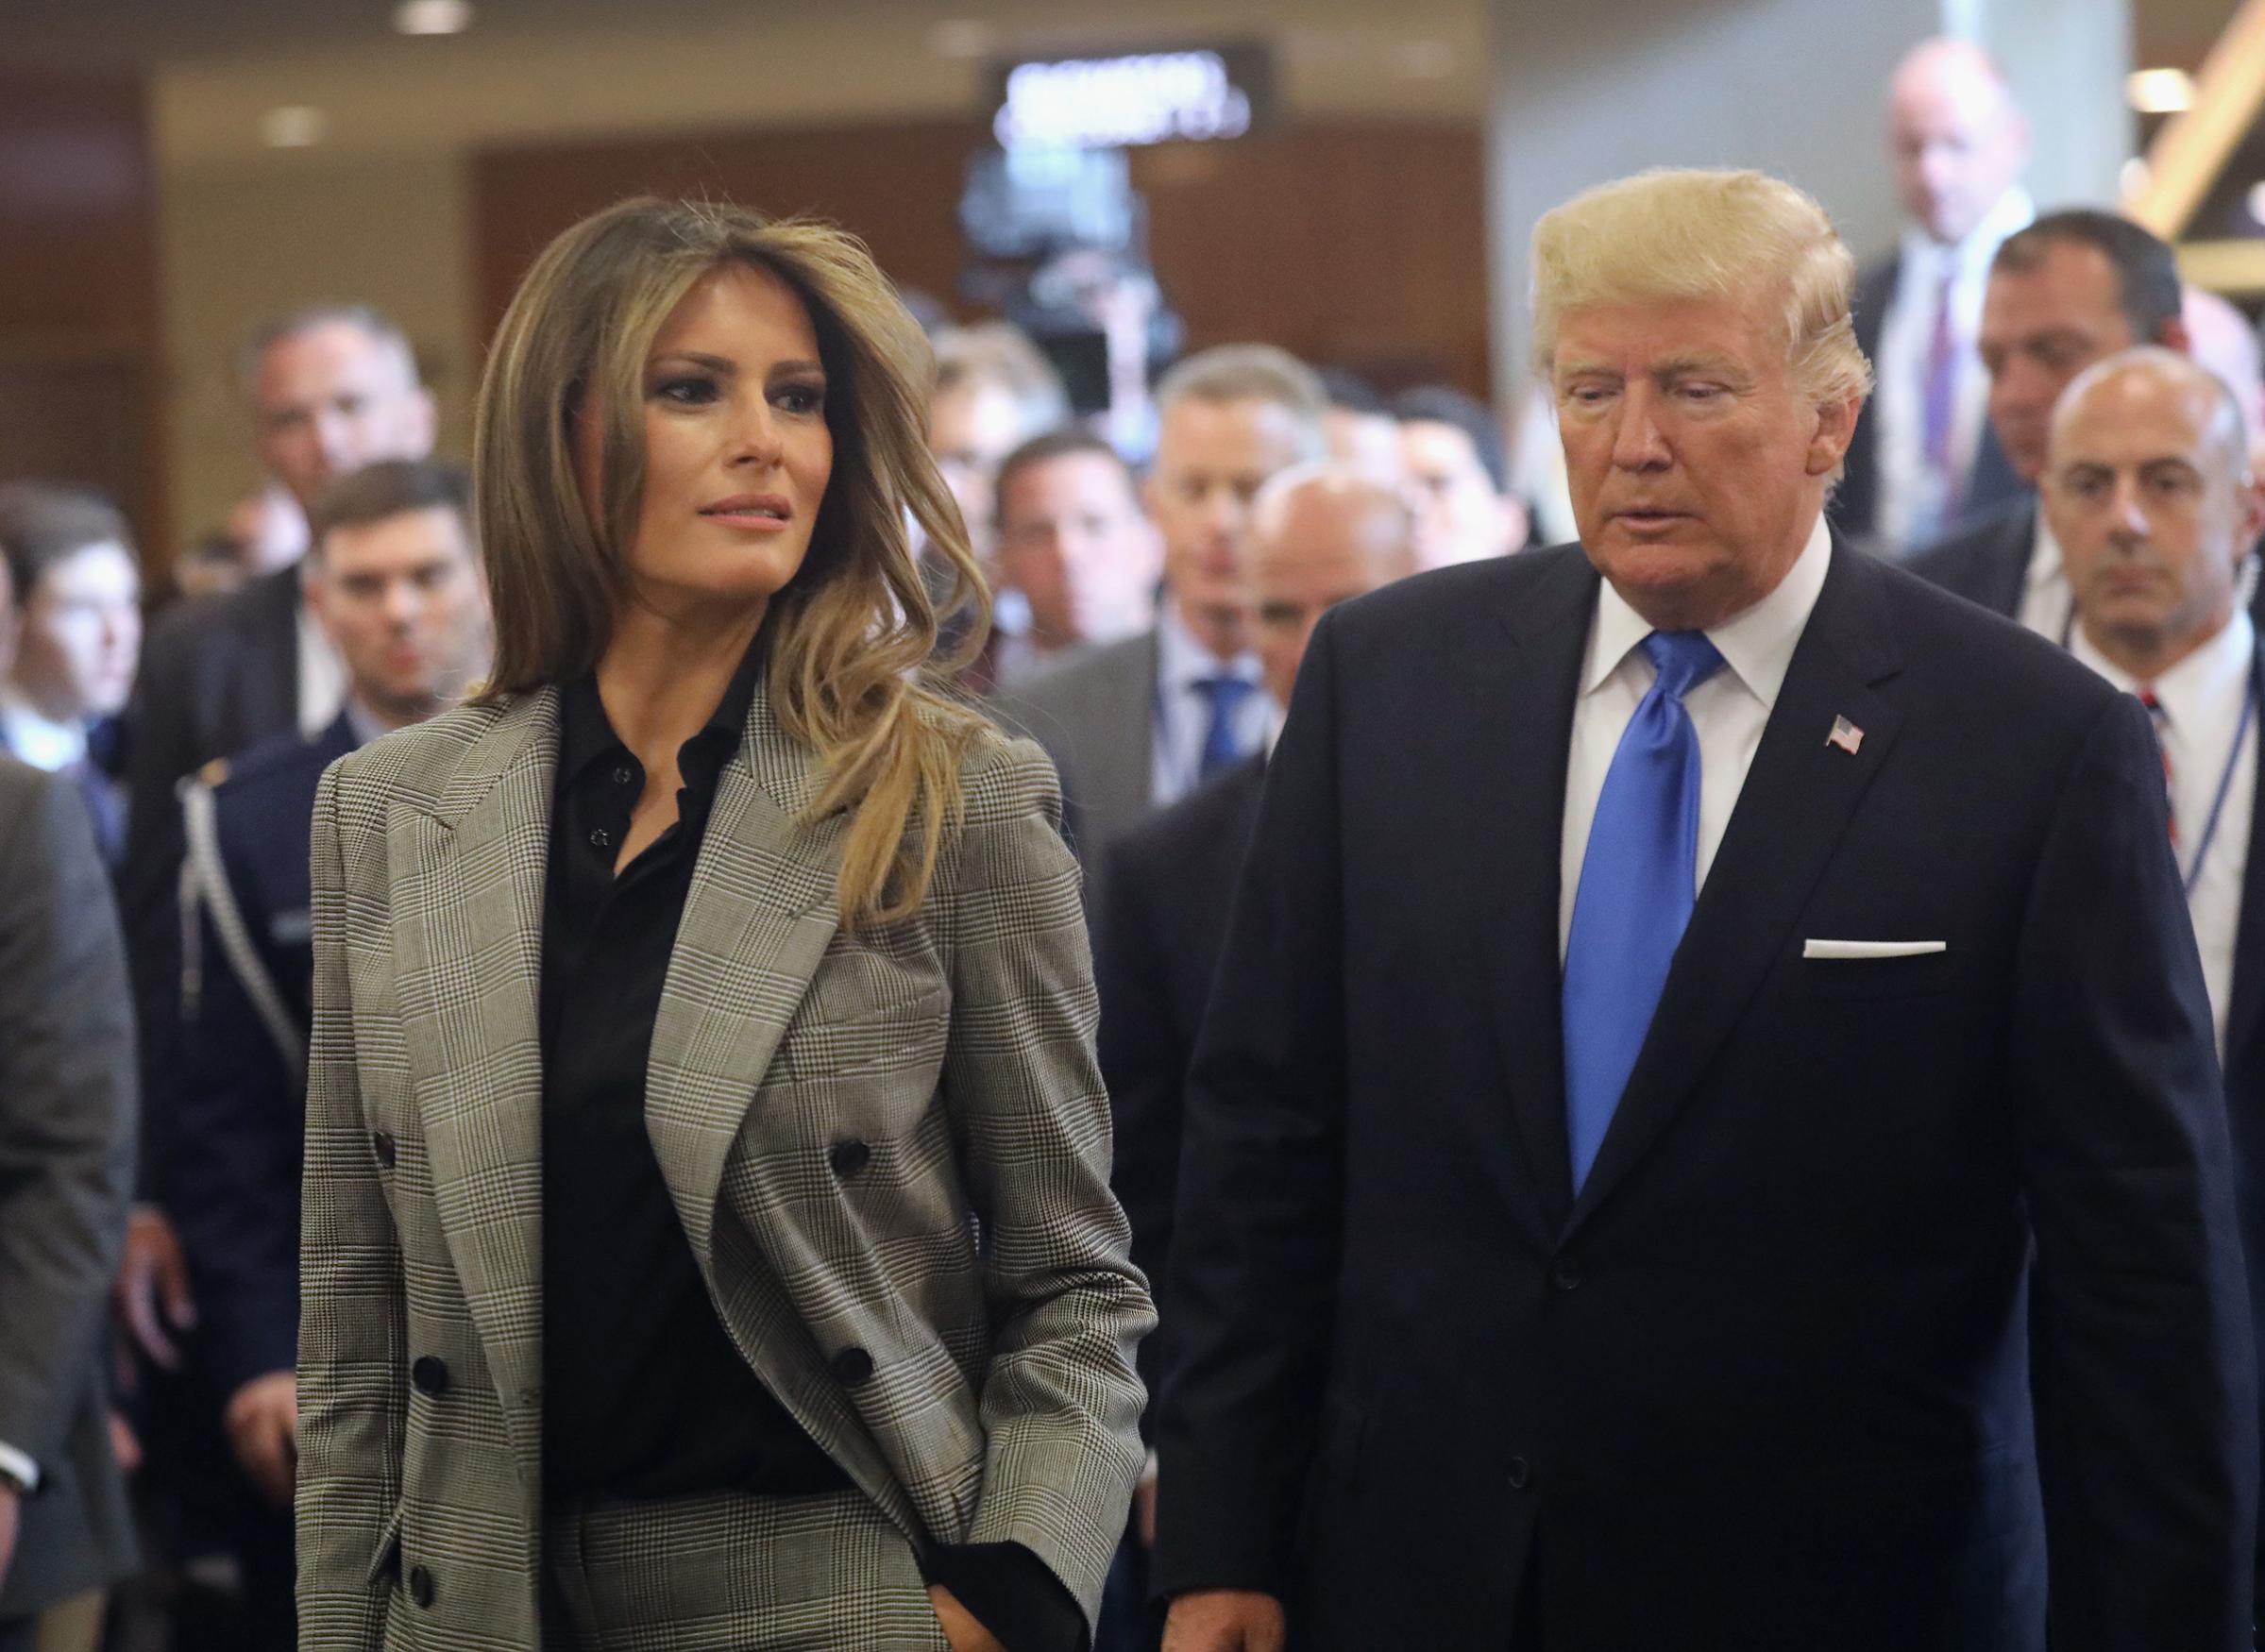 First lady Melania Trump wearing a pants suite by the Ralph Lauren Collection and President Donald Trump depart the United Nations after the president's speech on Sept. 19, 2017 in New York City.